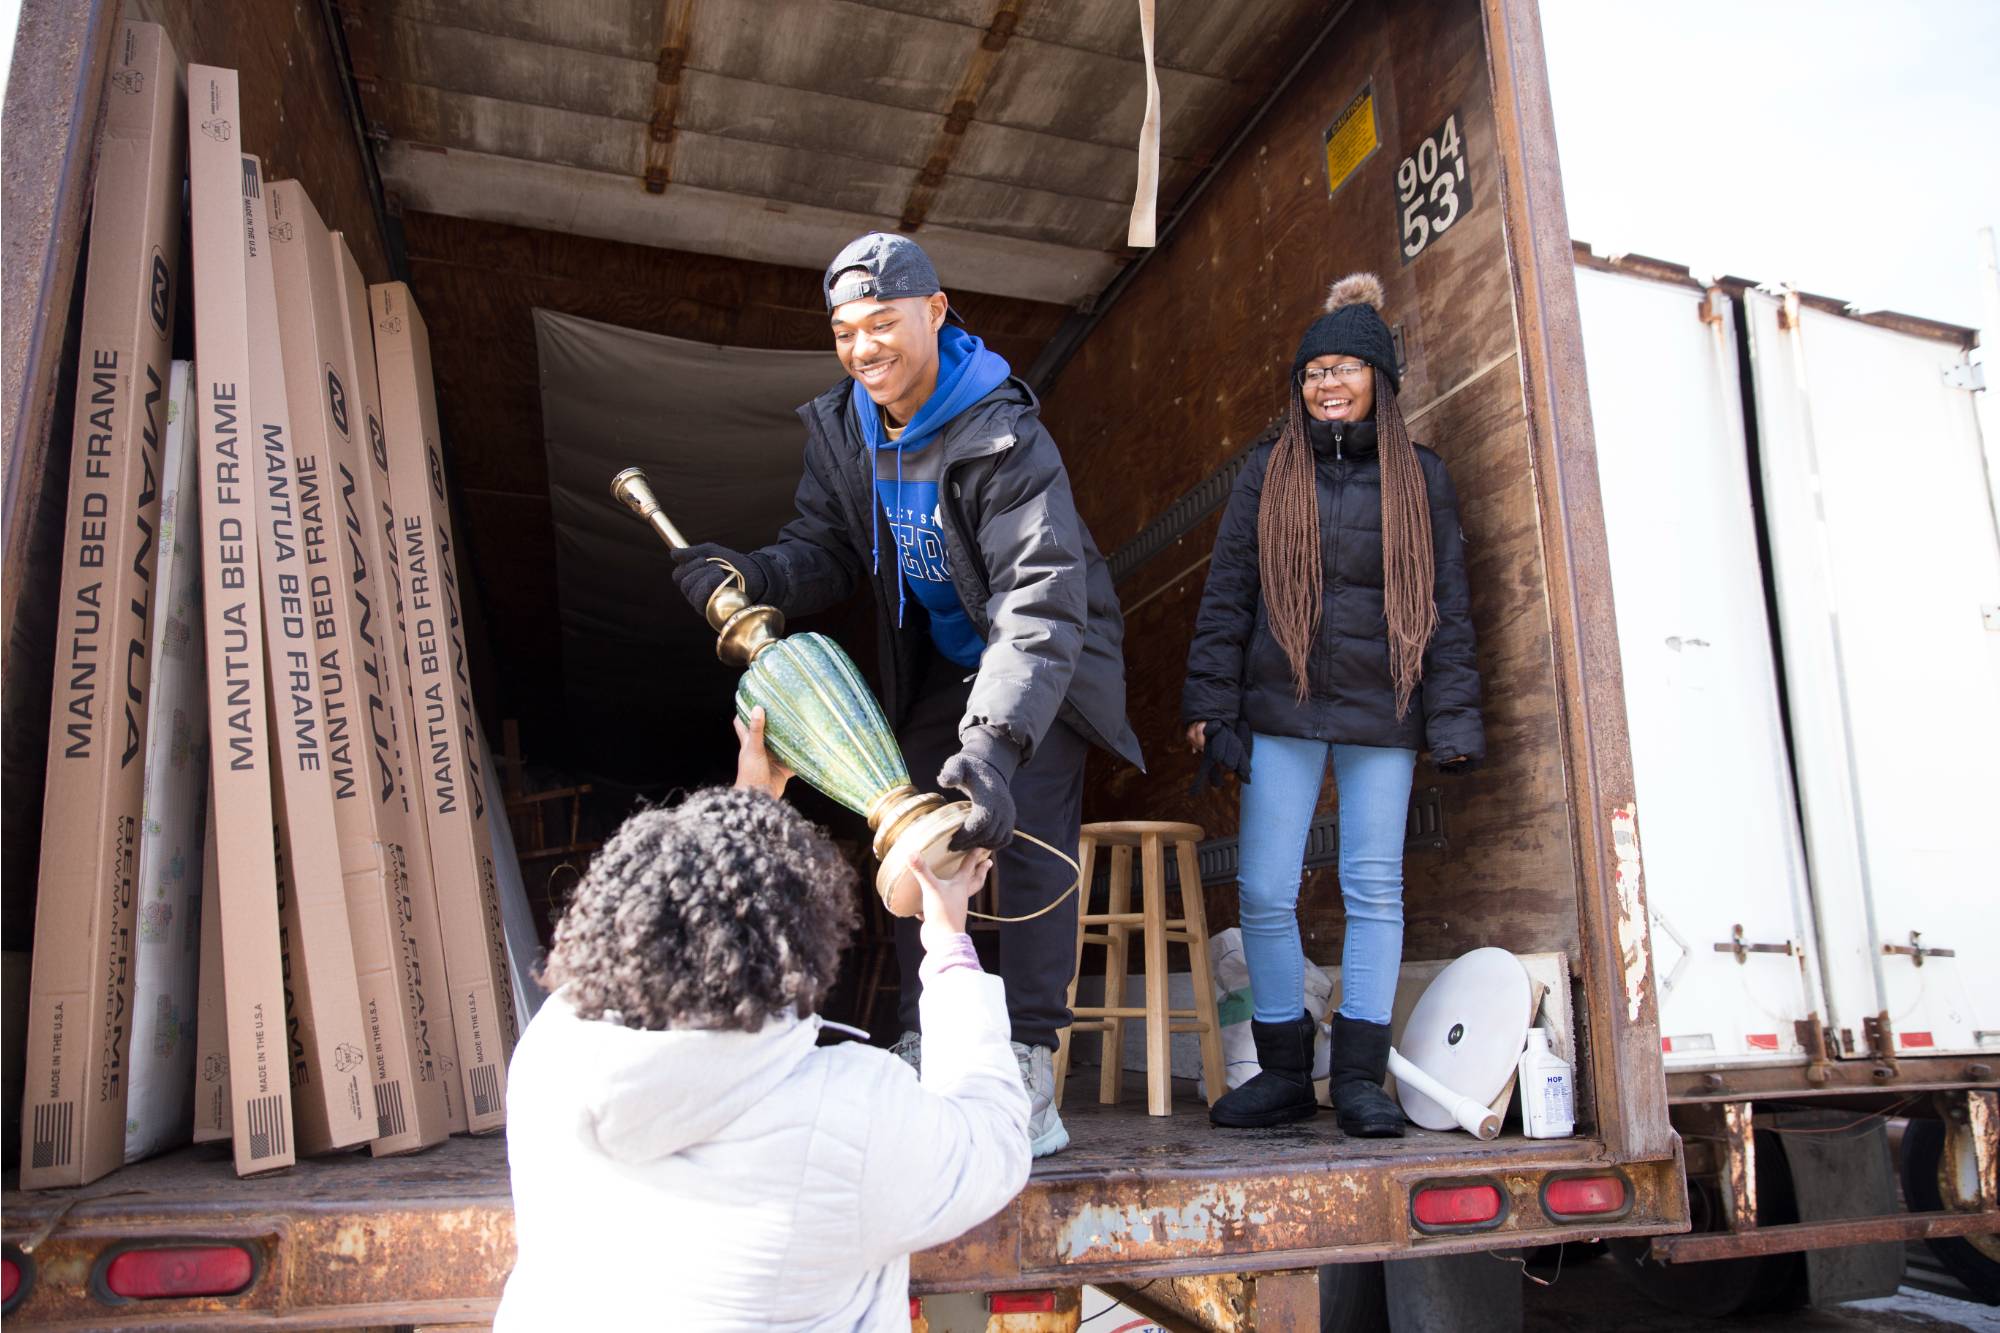 Students loading things out of a truck